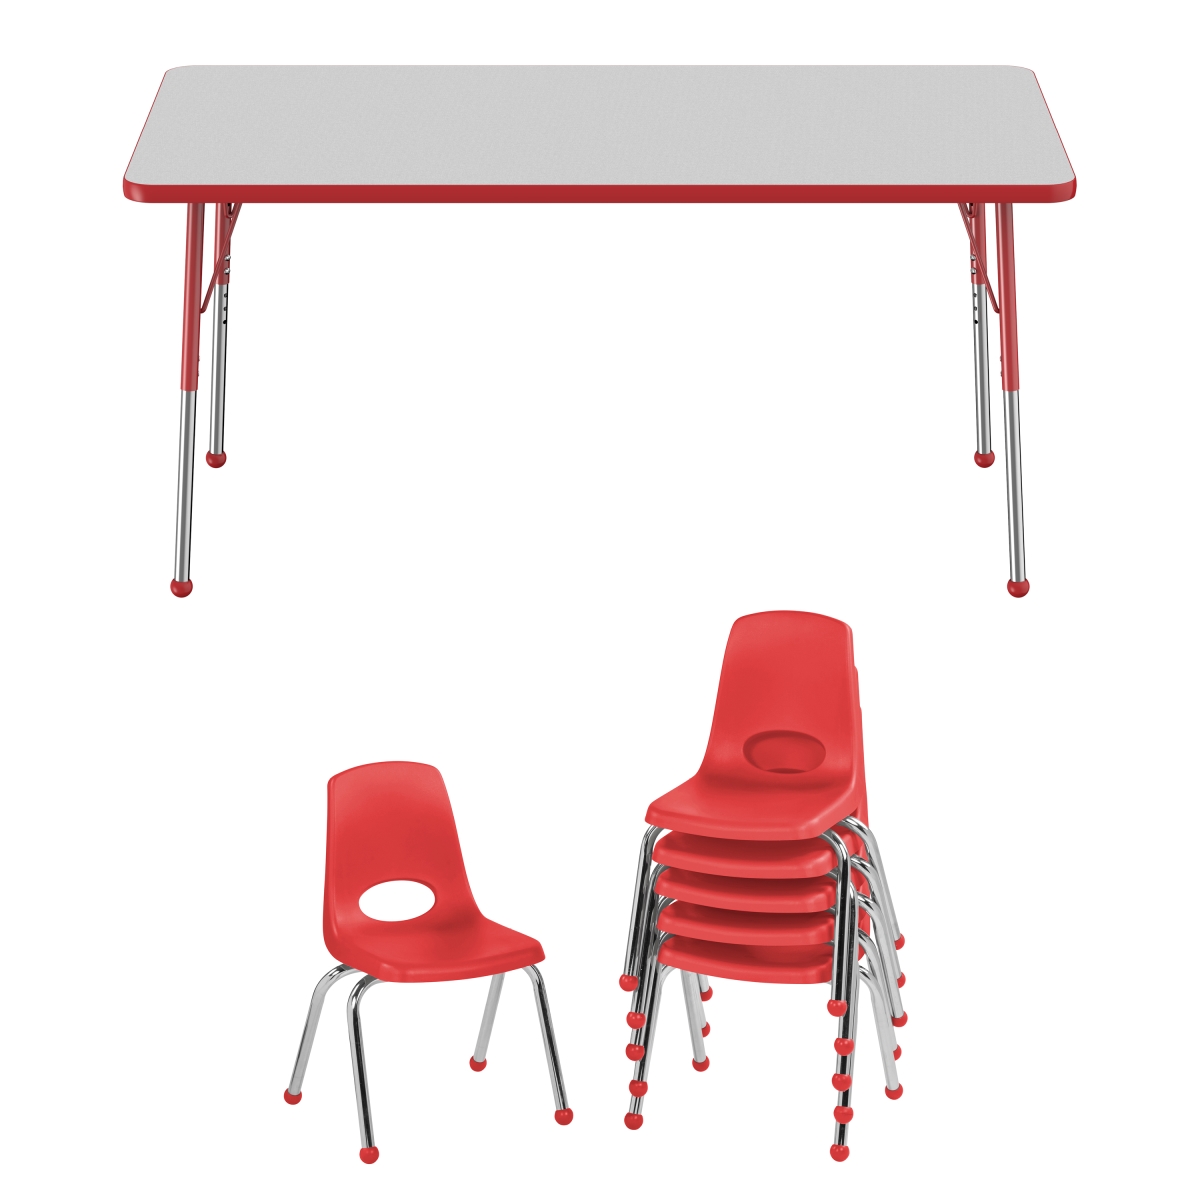 10300-gyrd 30 X 60 In. Rectangle T-mold Adjustable Activity Table Standard Ball With 6 Stack Chairs 14 In. Ball Glide - Grey & Red